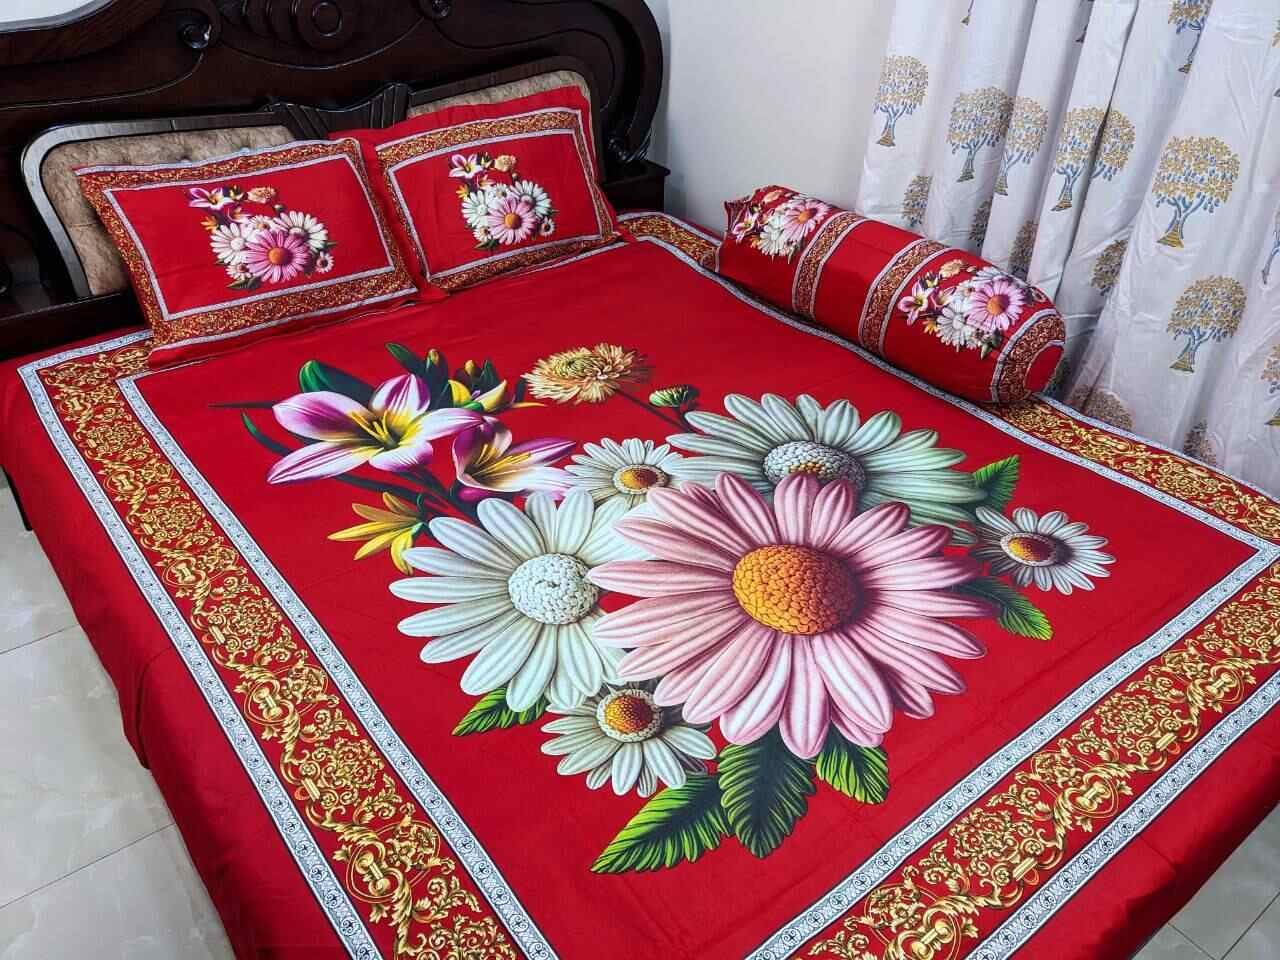 100% Cotton King Size Bedsheet (Many flowers together)  (৩ পিসের সেট)